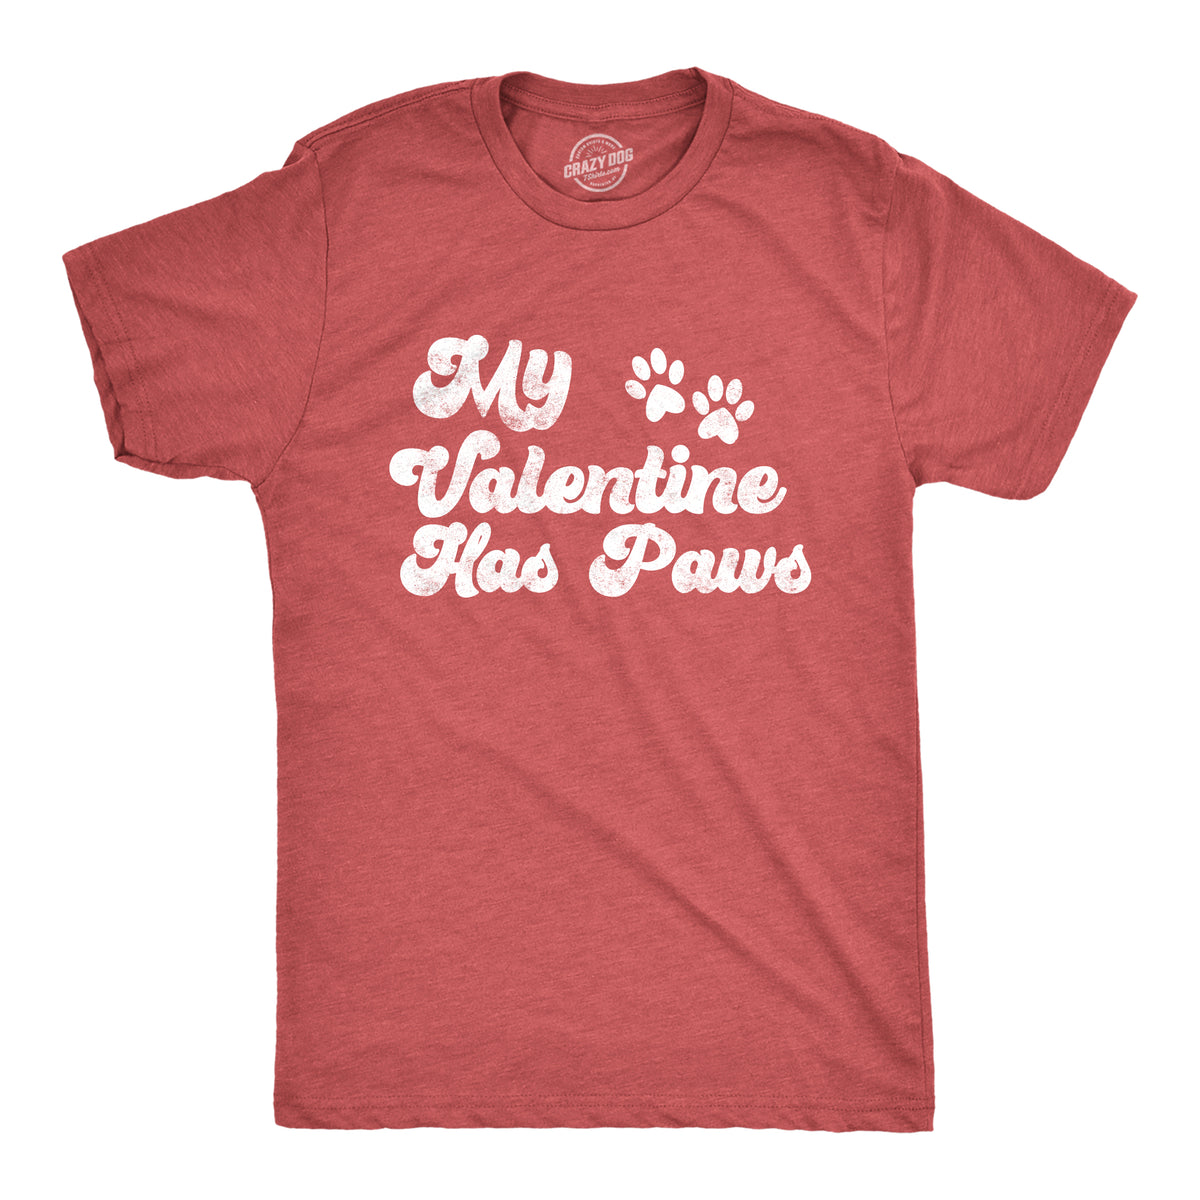 Funny Heather Red - PAWS My Favorite Valentine Has Paws Mens T Shirt Nerdy Valentine&#39;s Day Tee